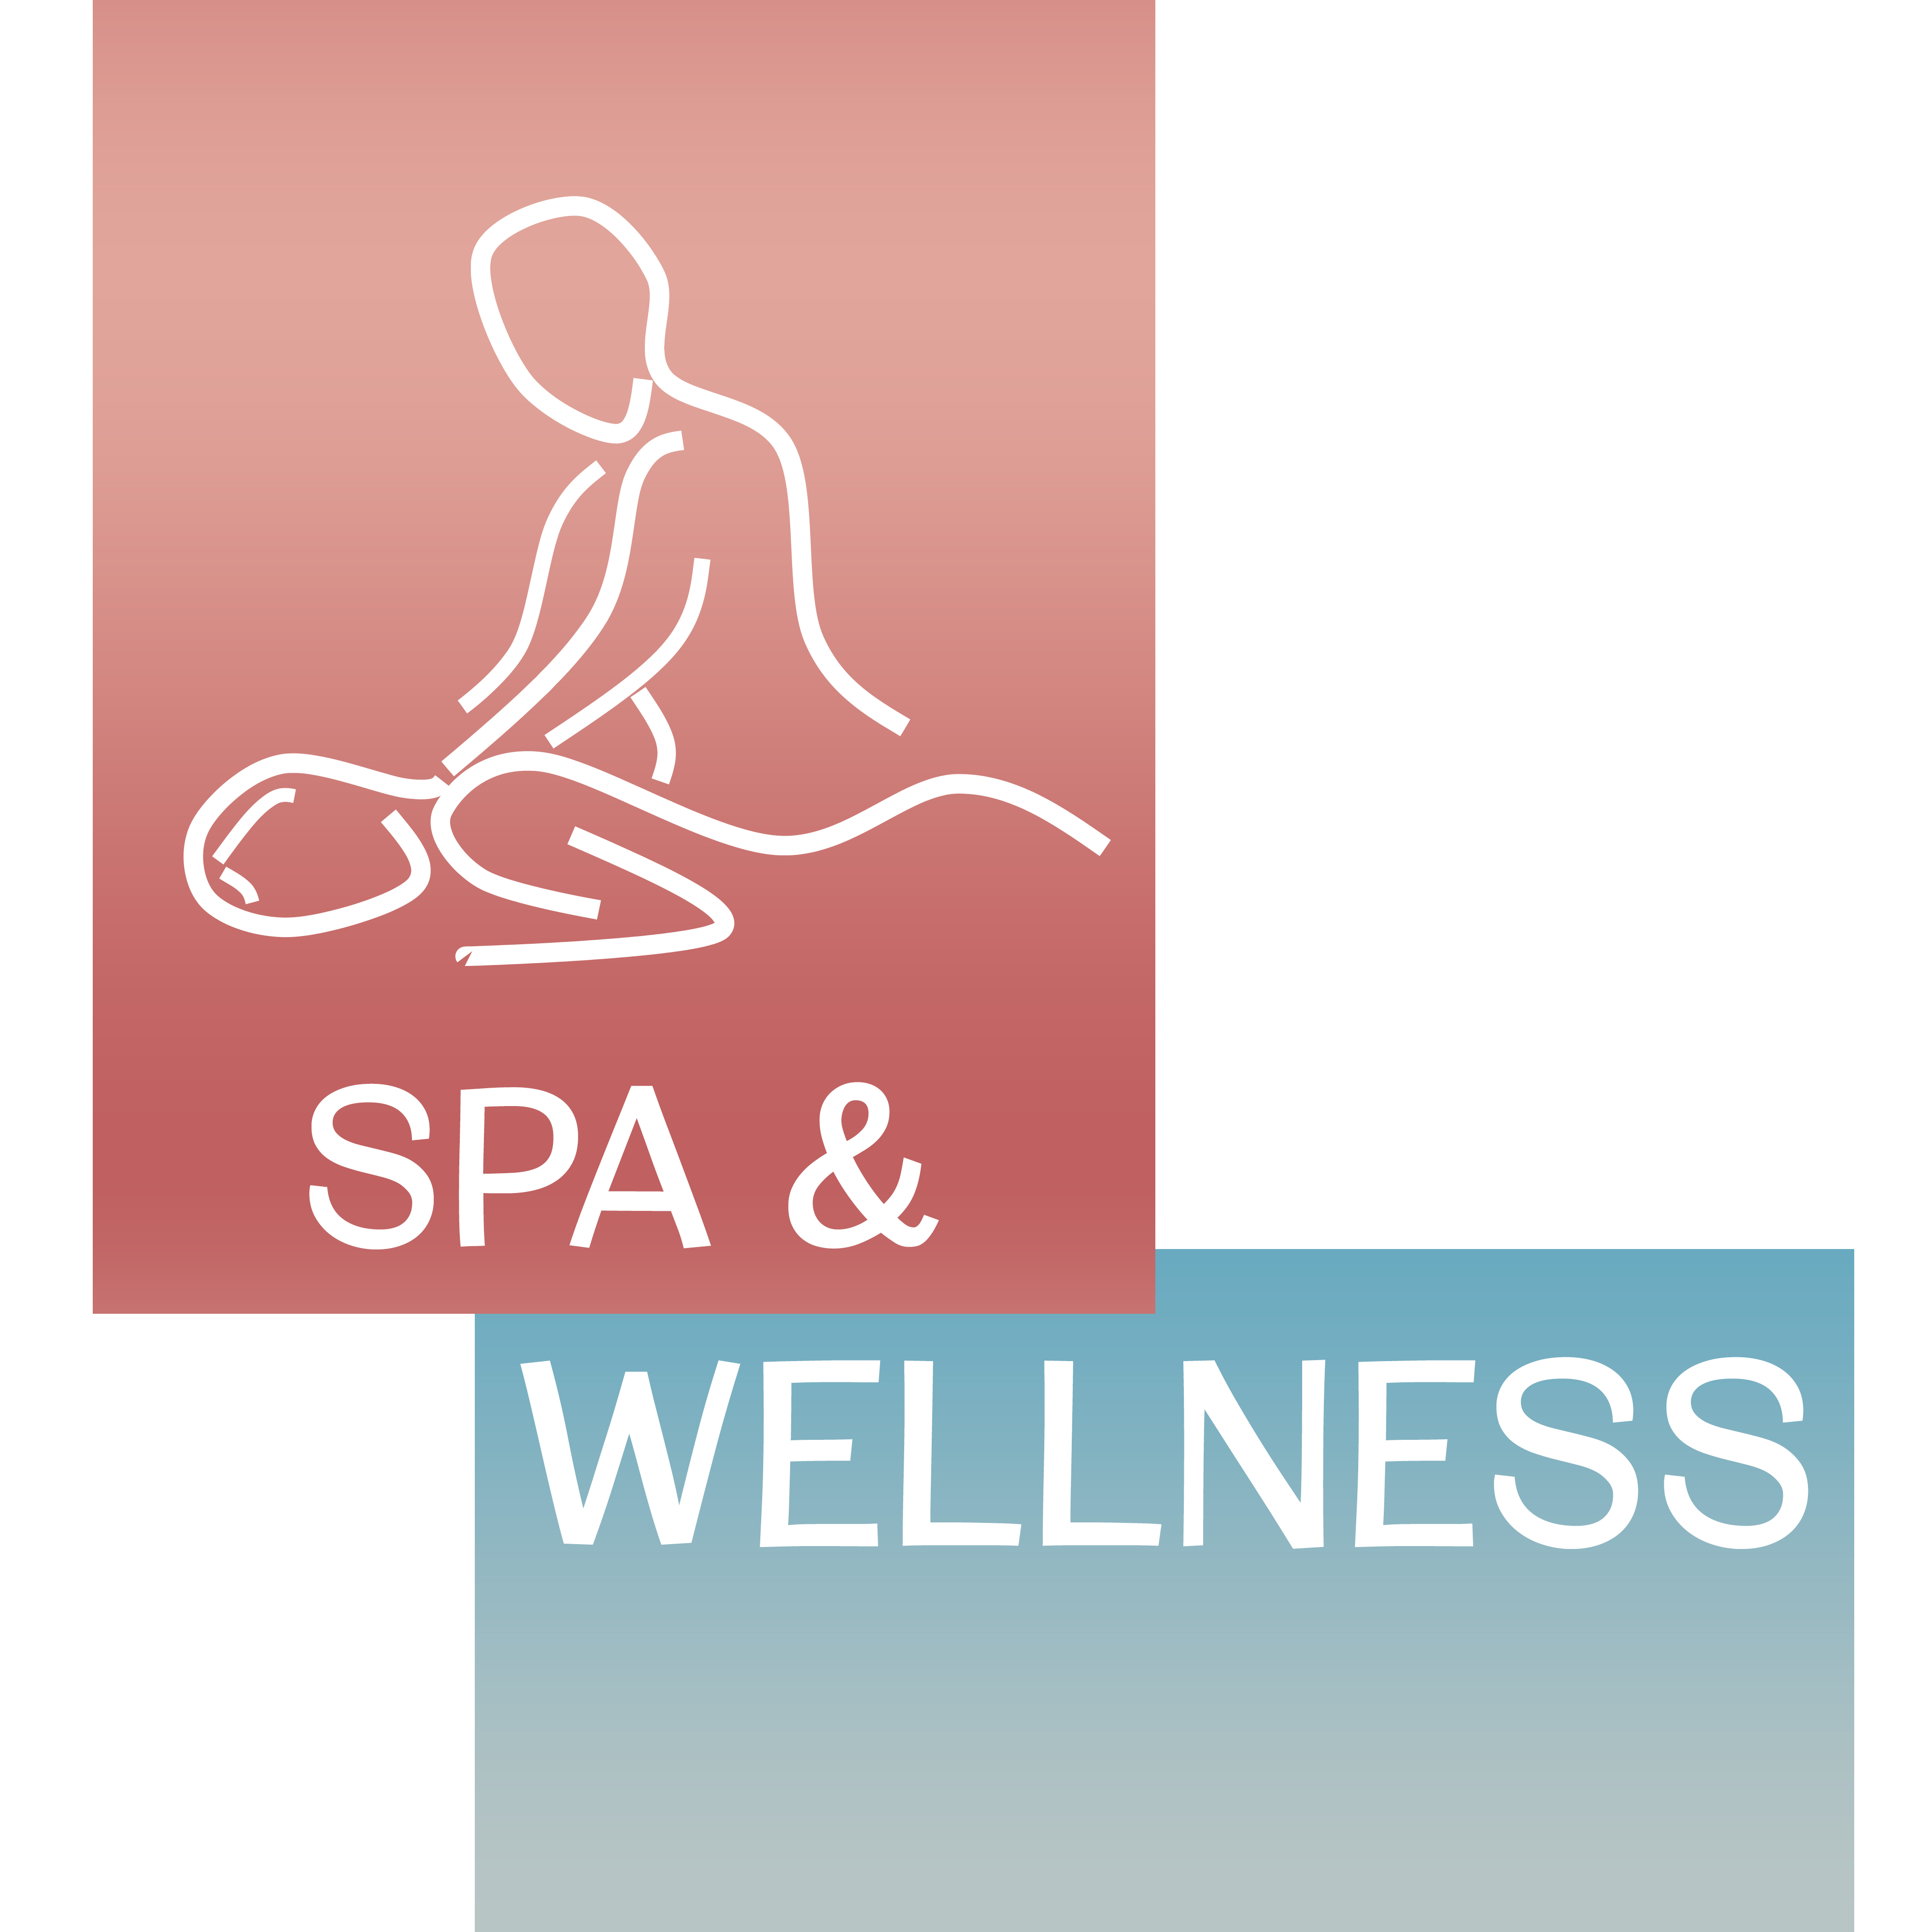 Spa & Wellness – New Age Music for Relaxation, Pure Mind, Deep Massage, Nature Sounds for Body, Zen, Melodies of Sea, Rest, Spa Music